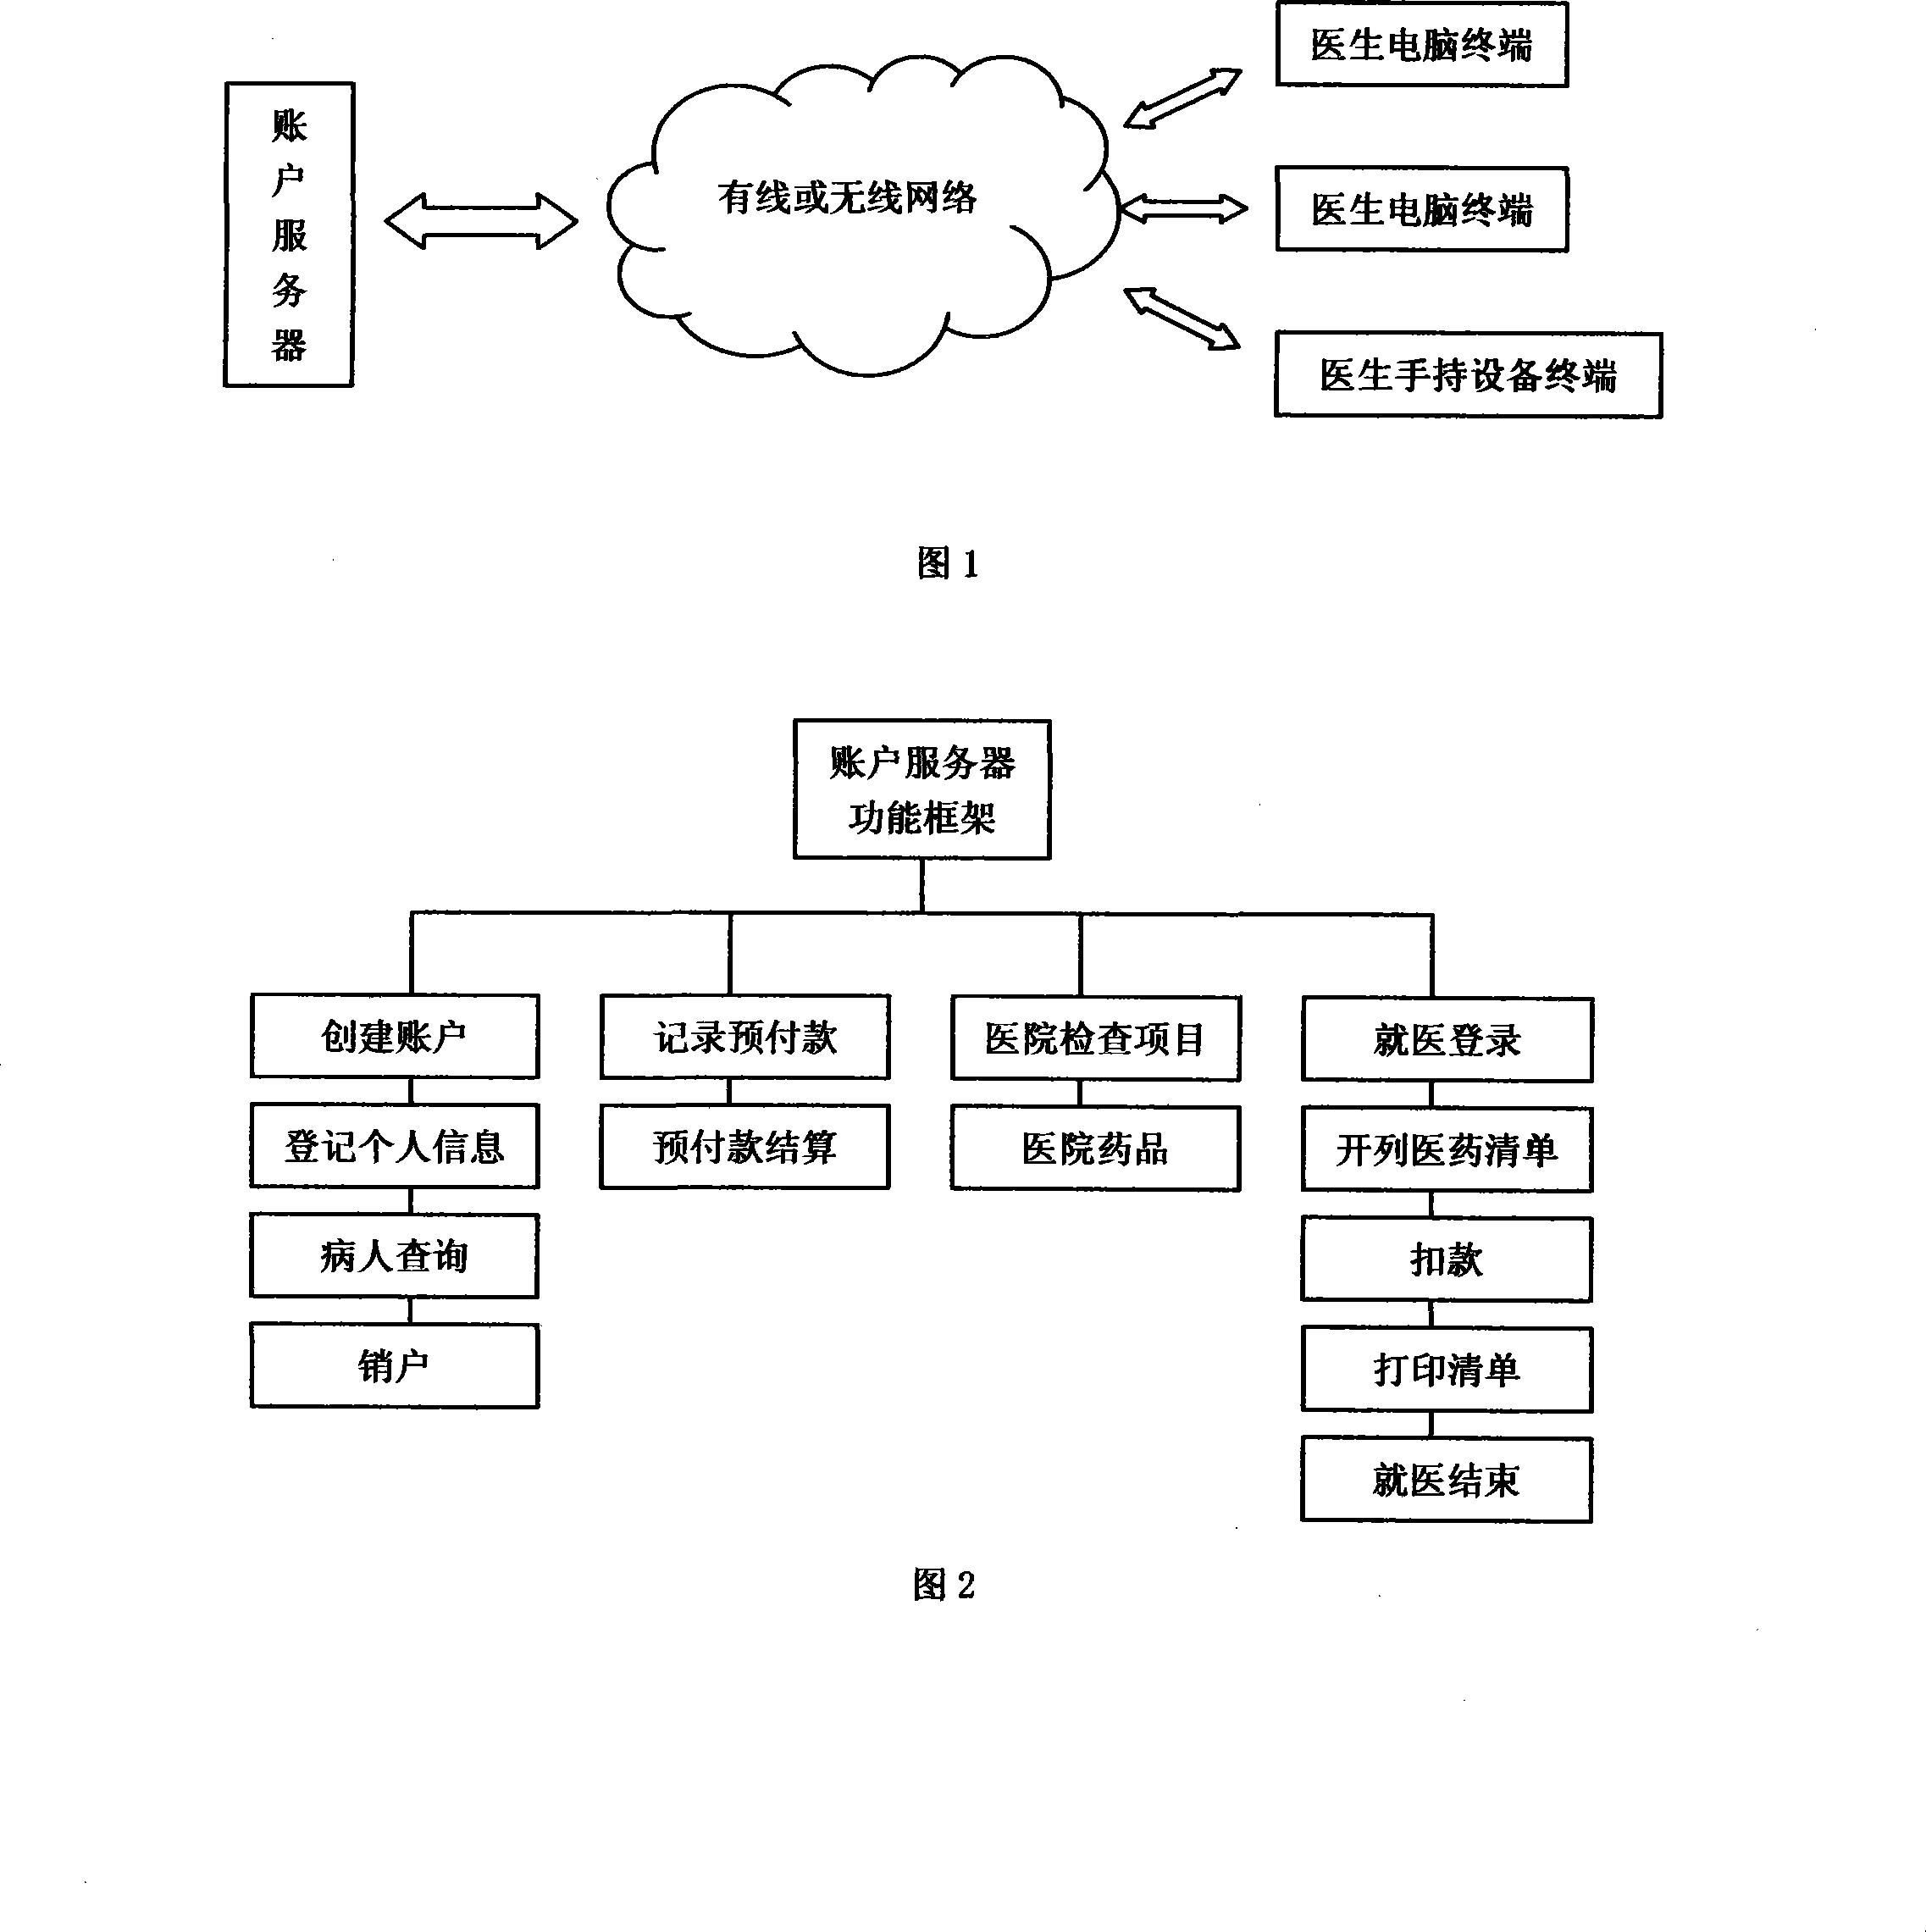 Method for promoting clinic efficiency by network